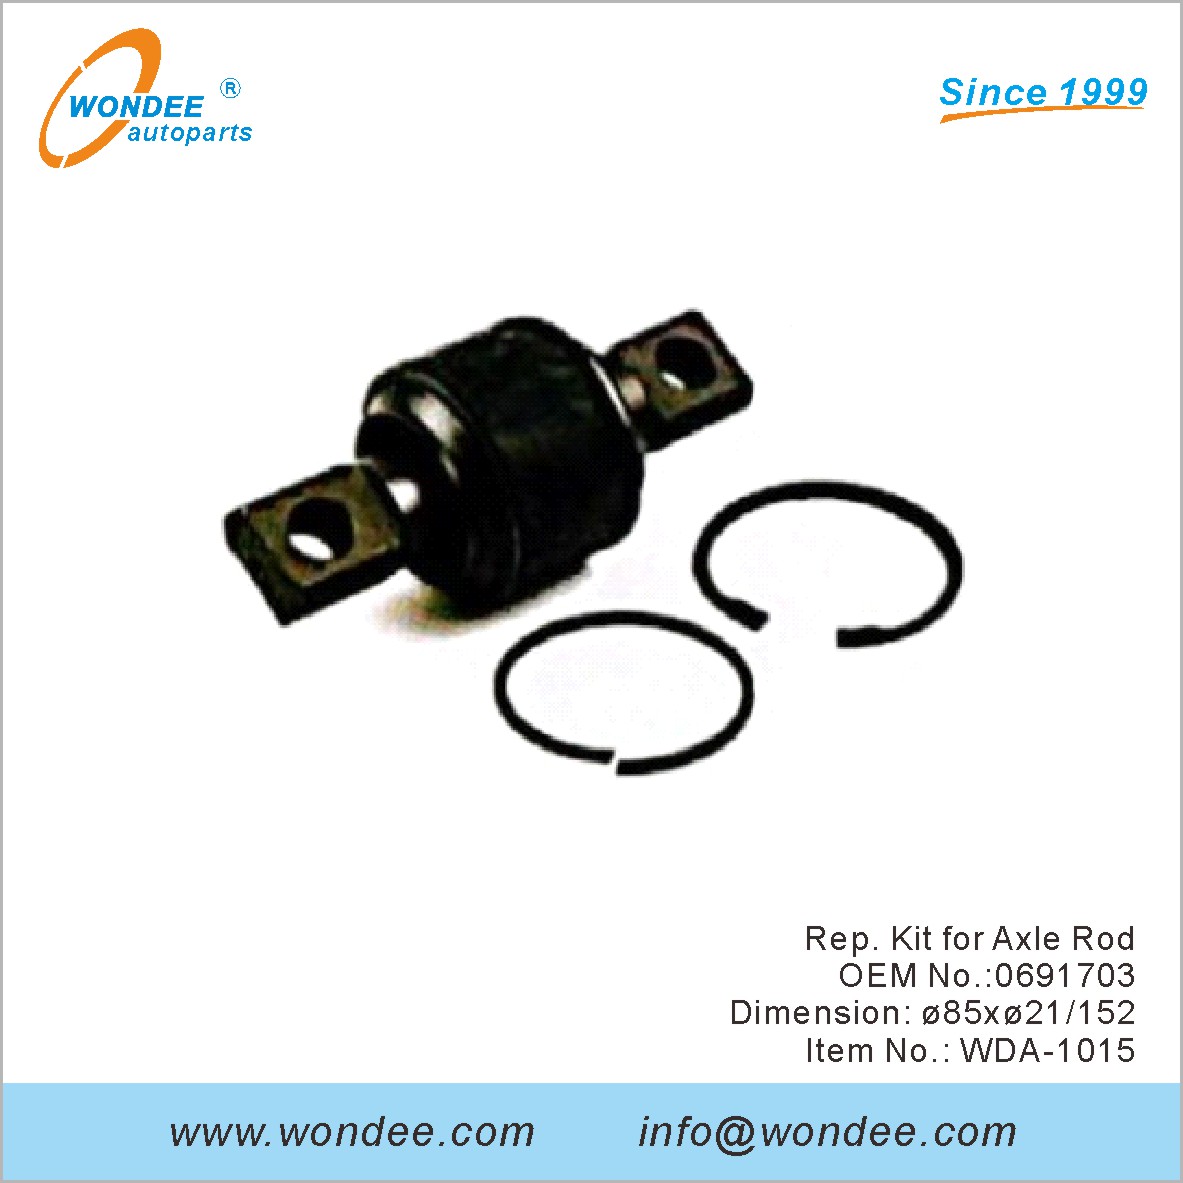 Rep. Kit for Axle Rod OEM 0691703 for DAF from WONDEE